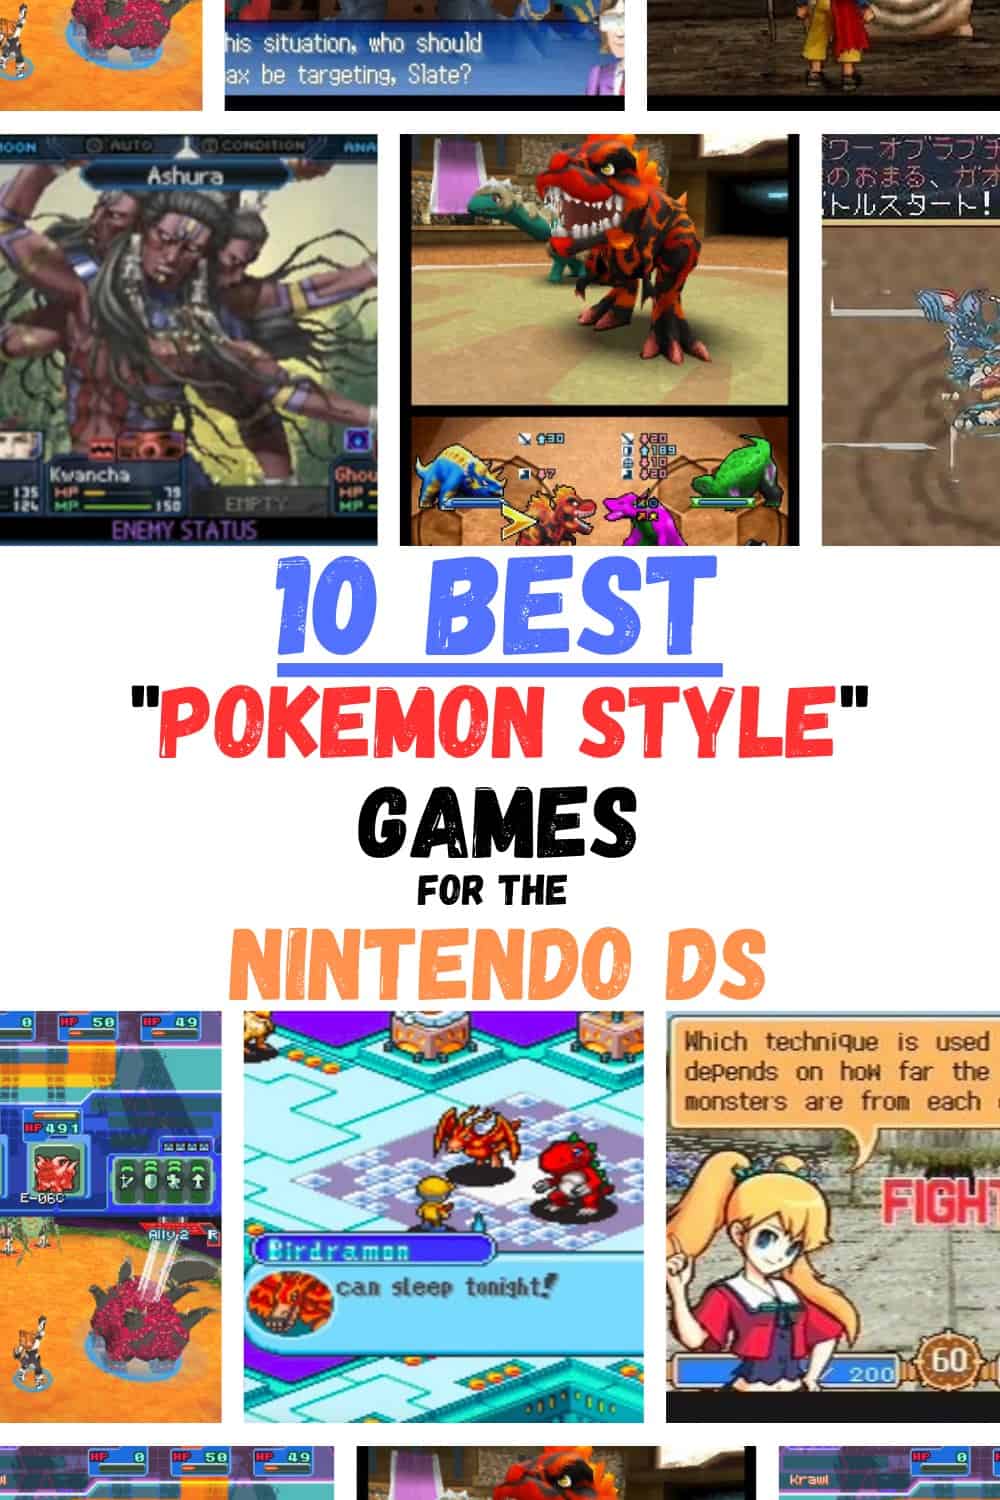 Games similar to pokemon for the DS